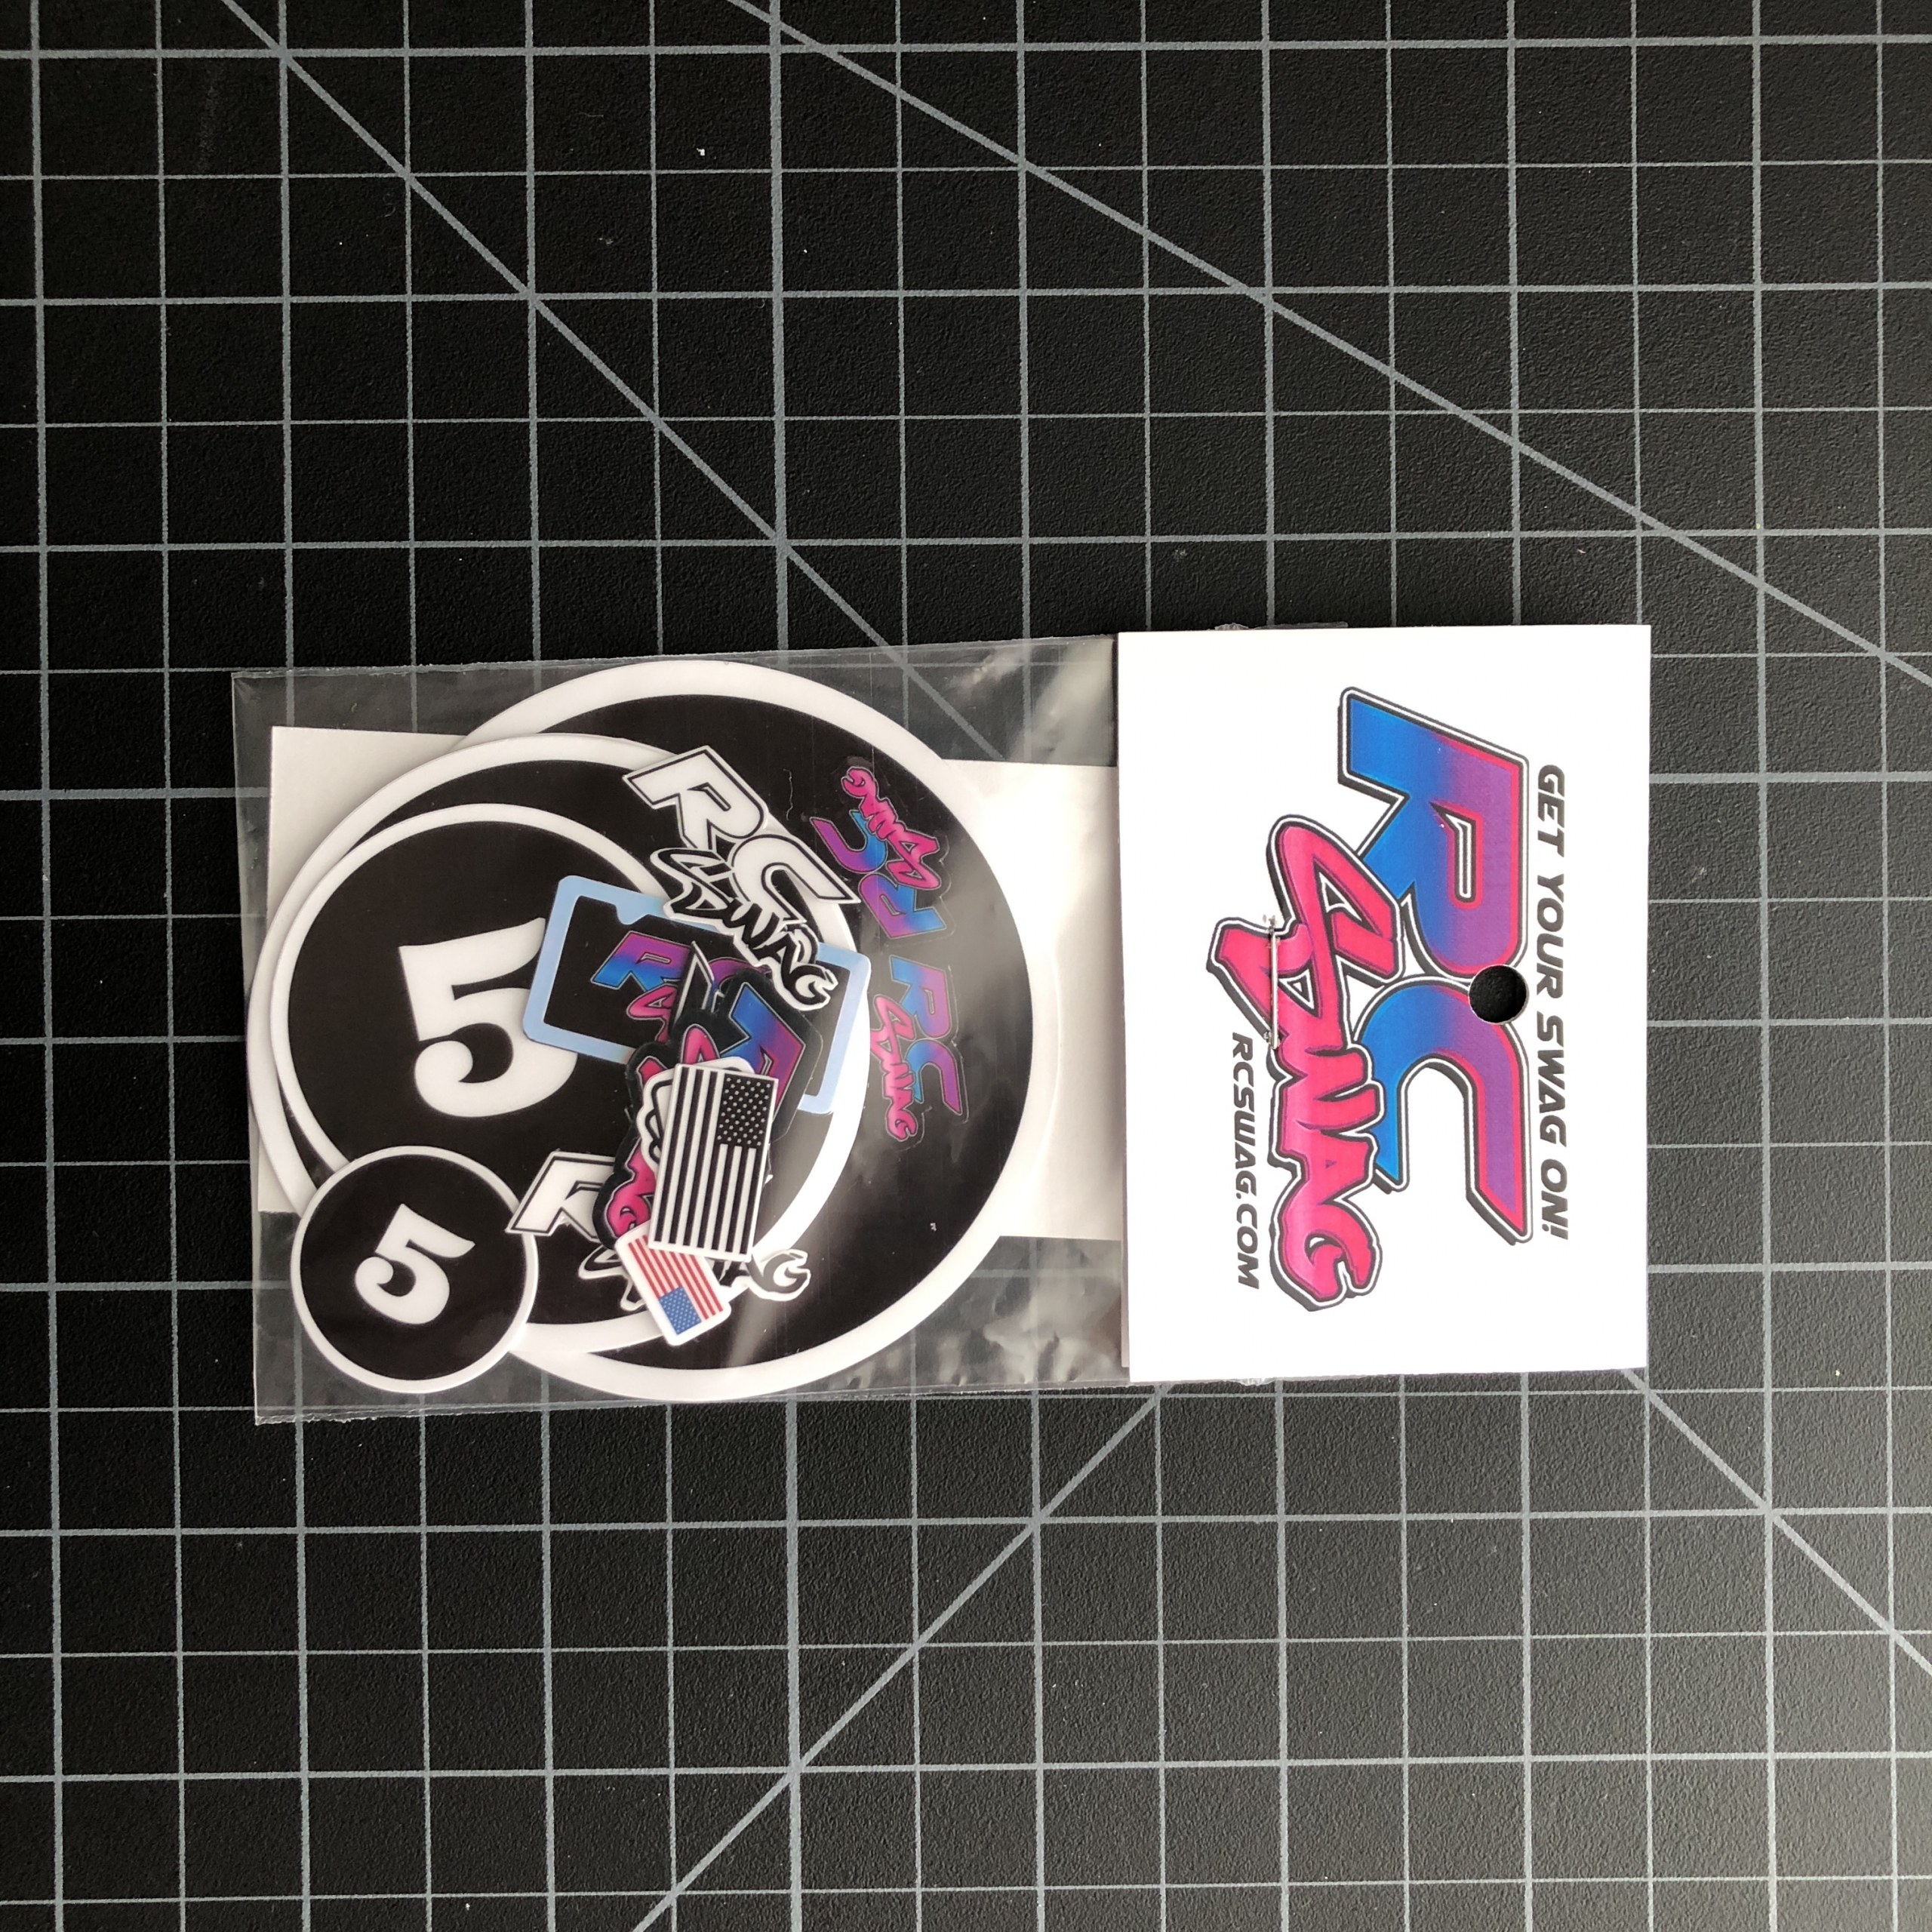 Number Sticker SWAG Packs RC SWAG Custom Stickers - Miniature, Scale, High Quality